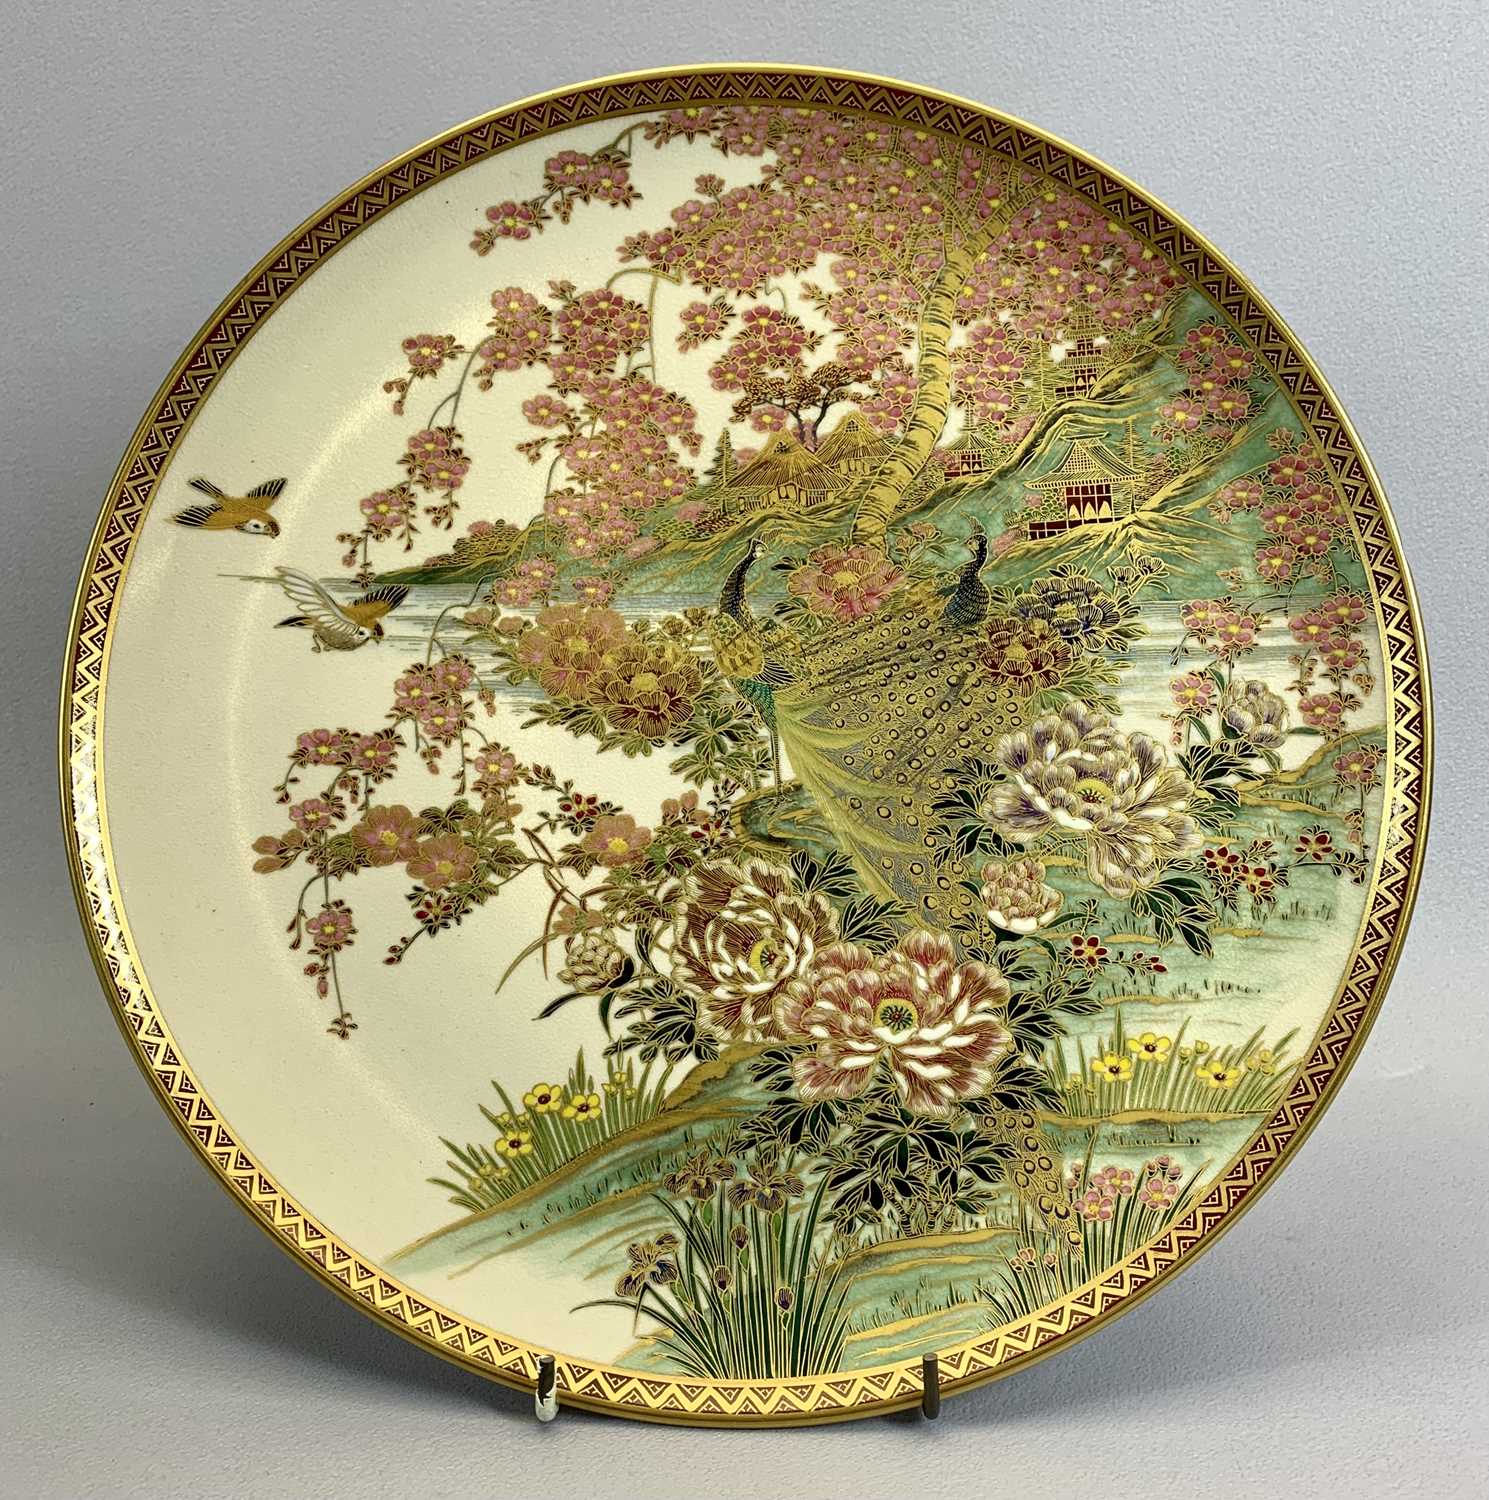 JAPANESE SATSUMA CIRCULAR CHARGER - late 19th century, decorated with two central